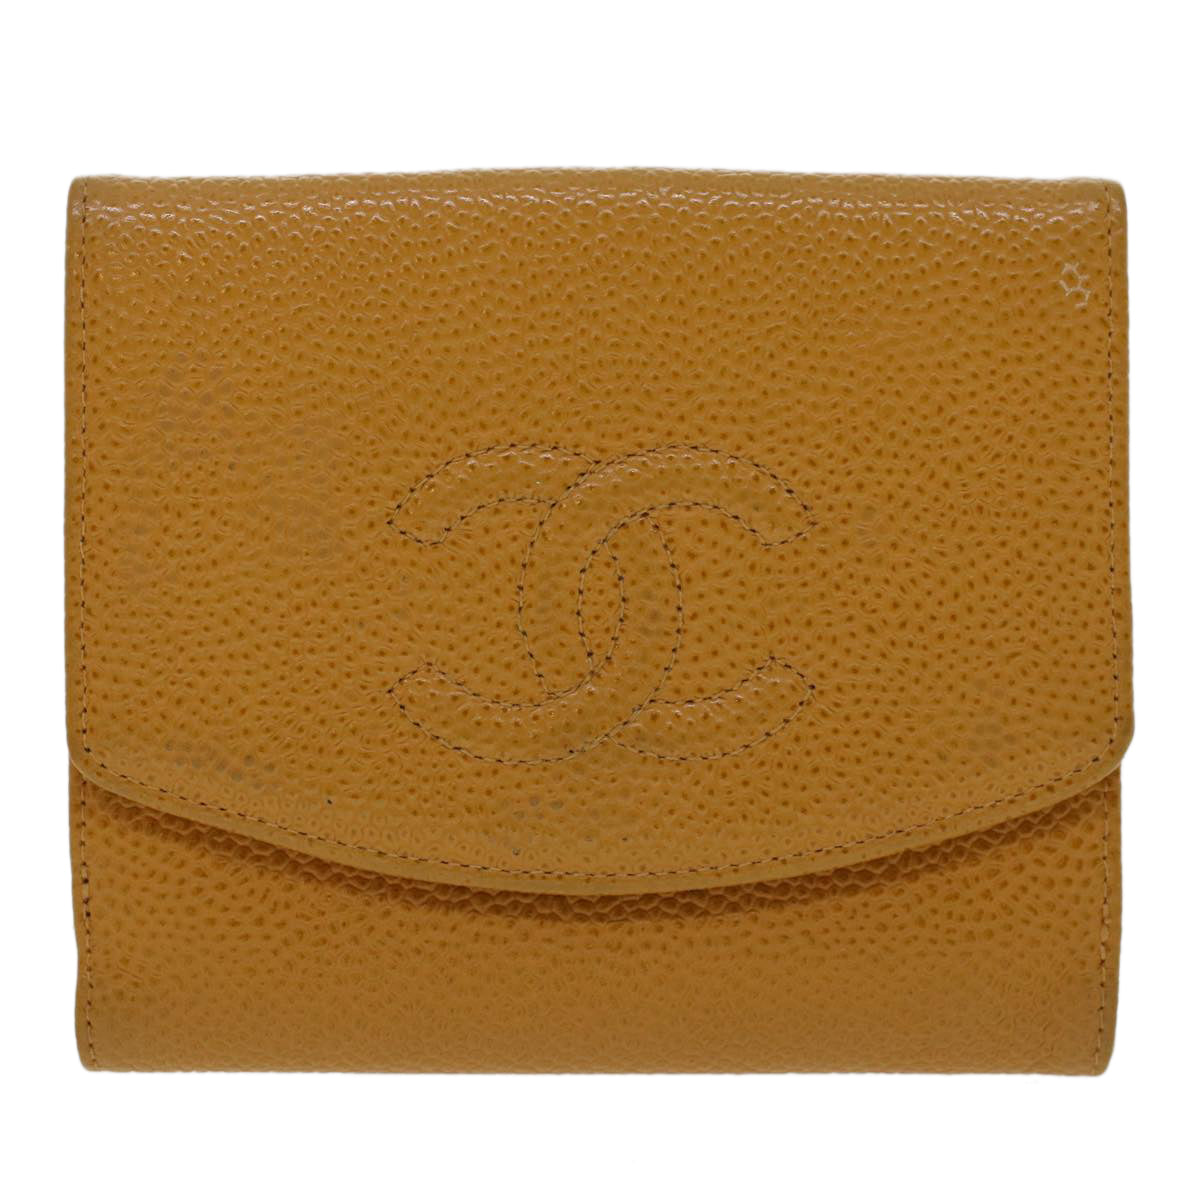 CHANEL Wallet Caviar Skin Yellow CC Auth ep1148